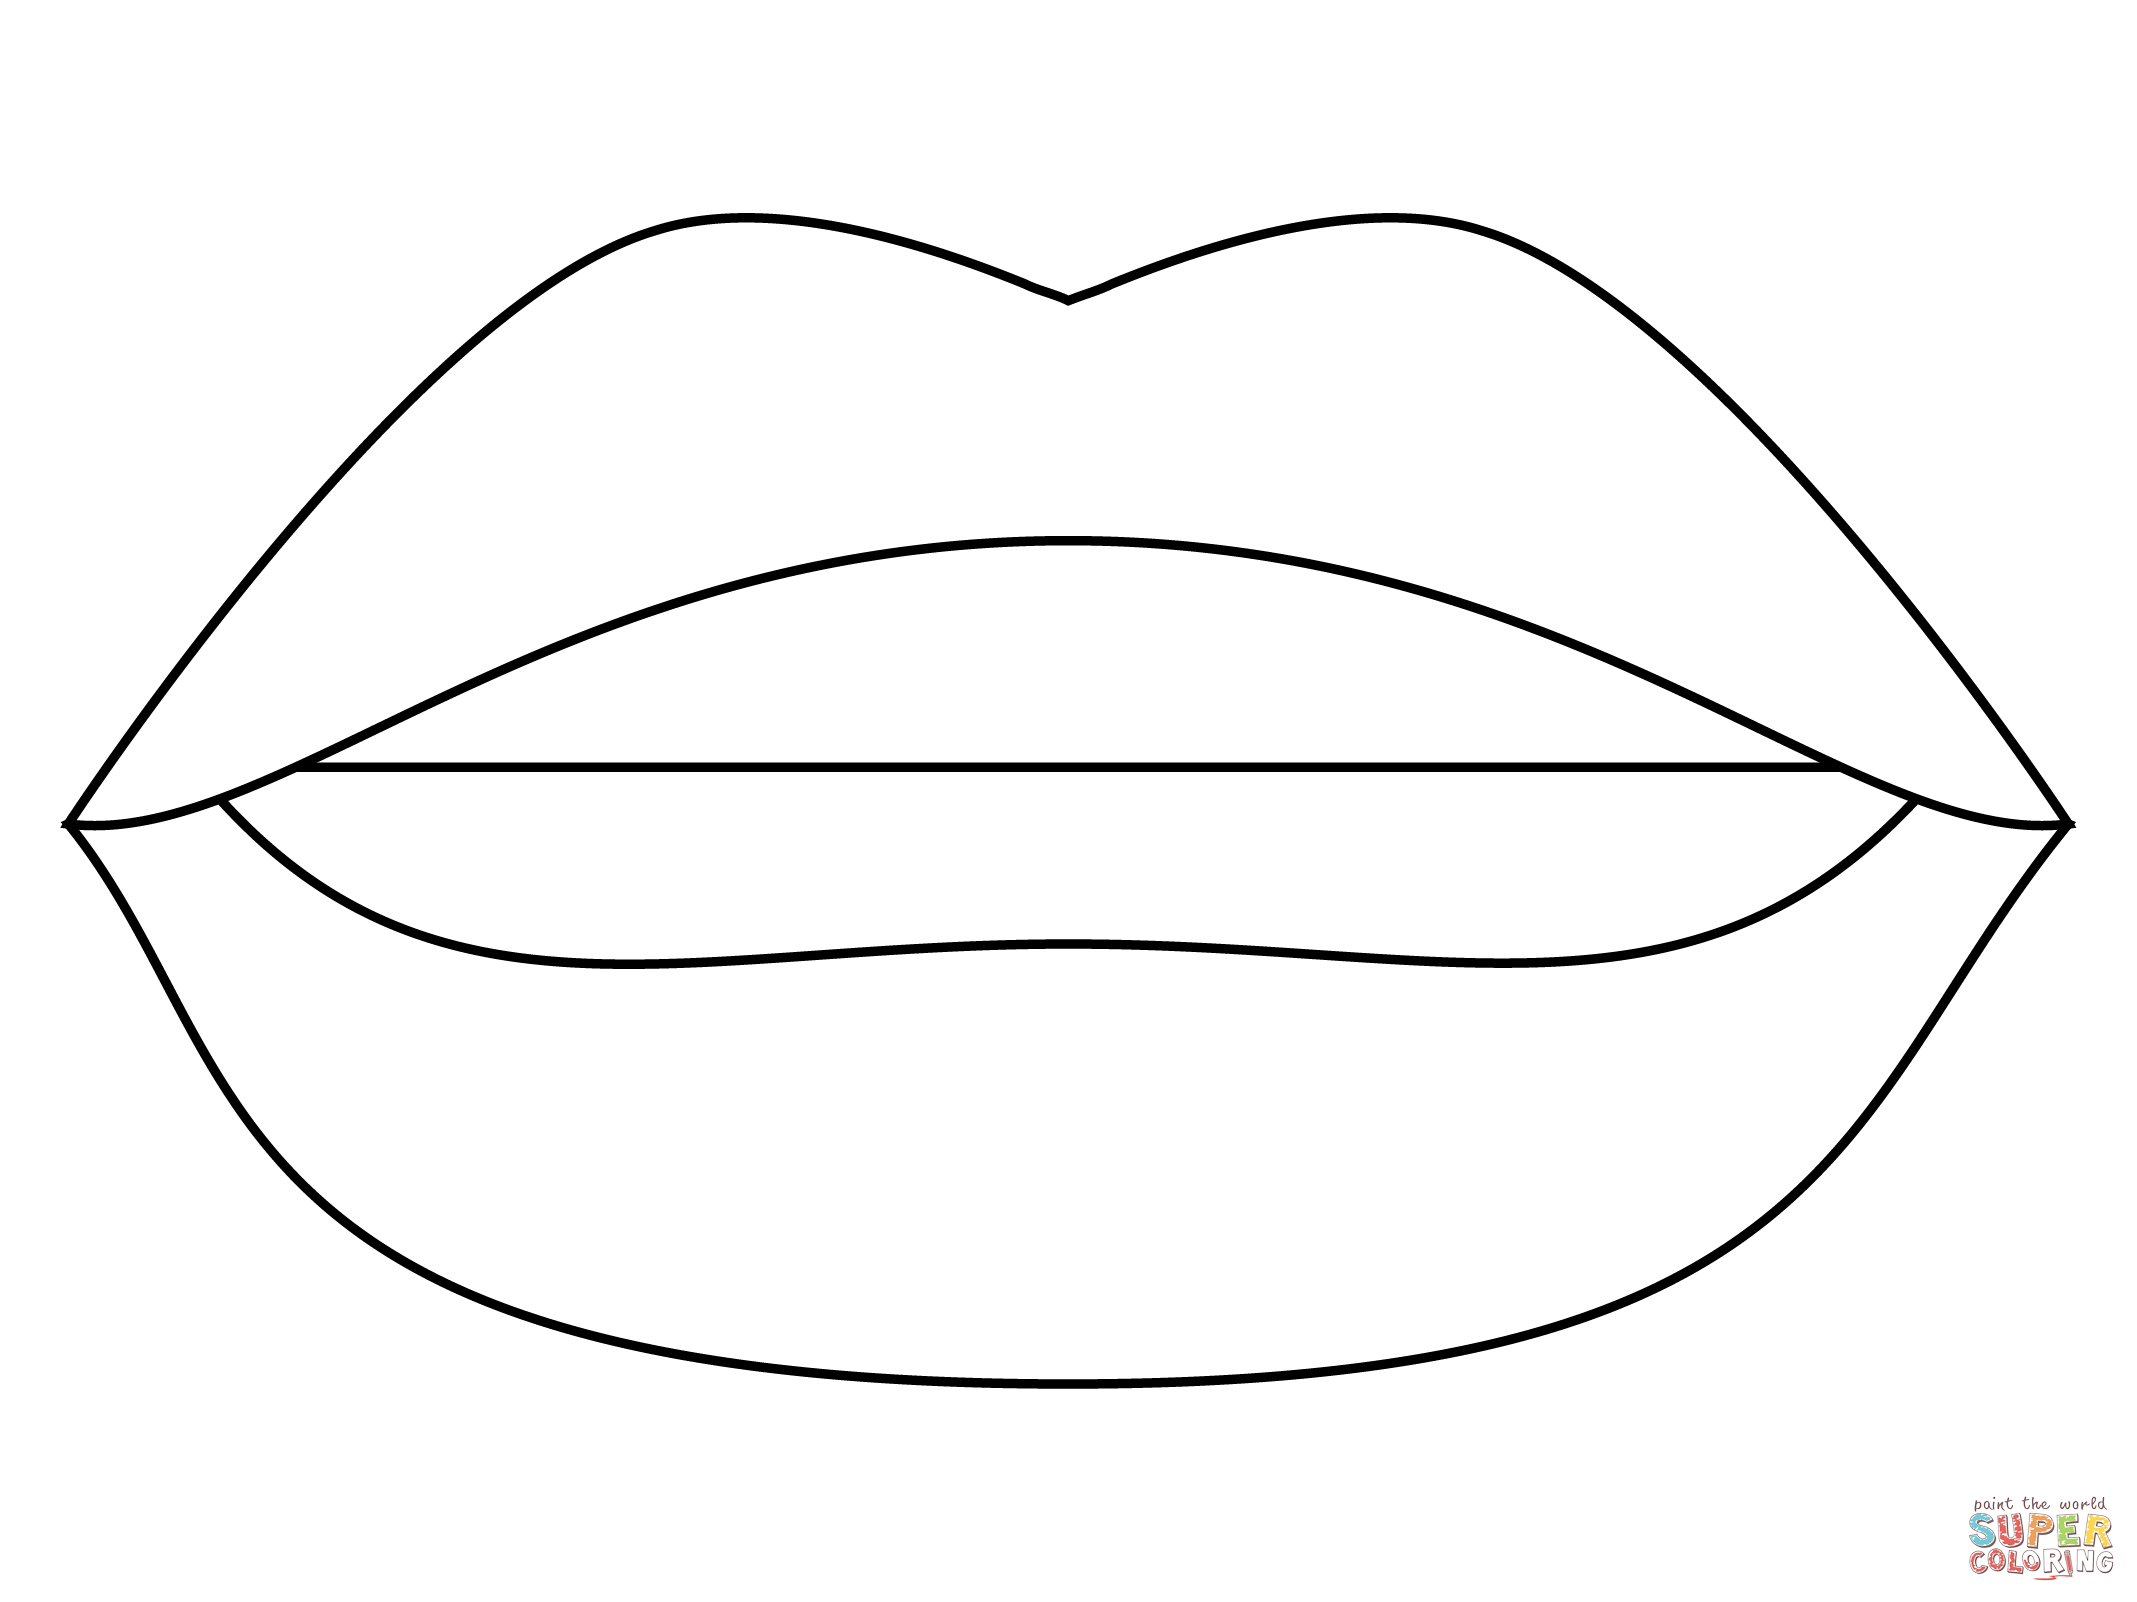 Mouth coloring page | Free Printable Coloring Pages